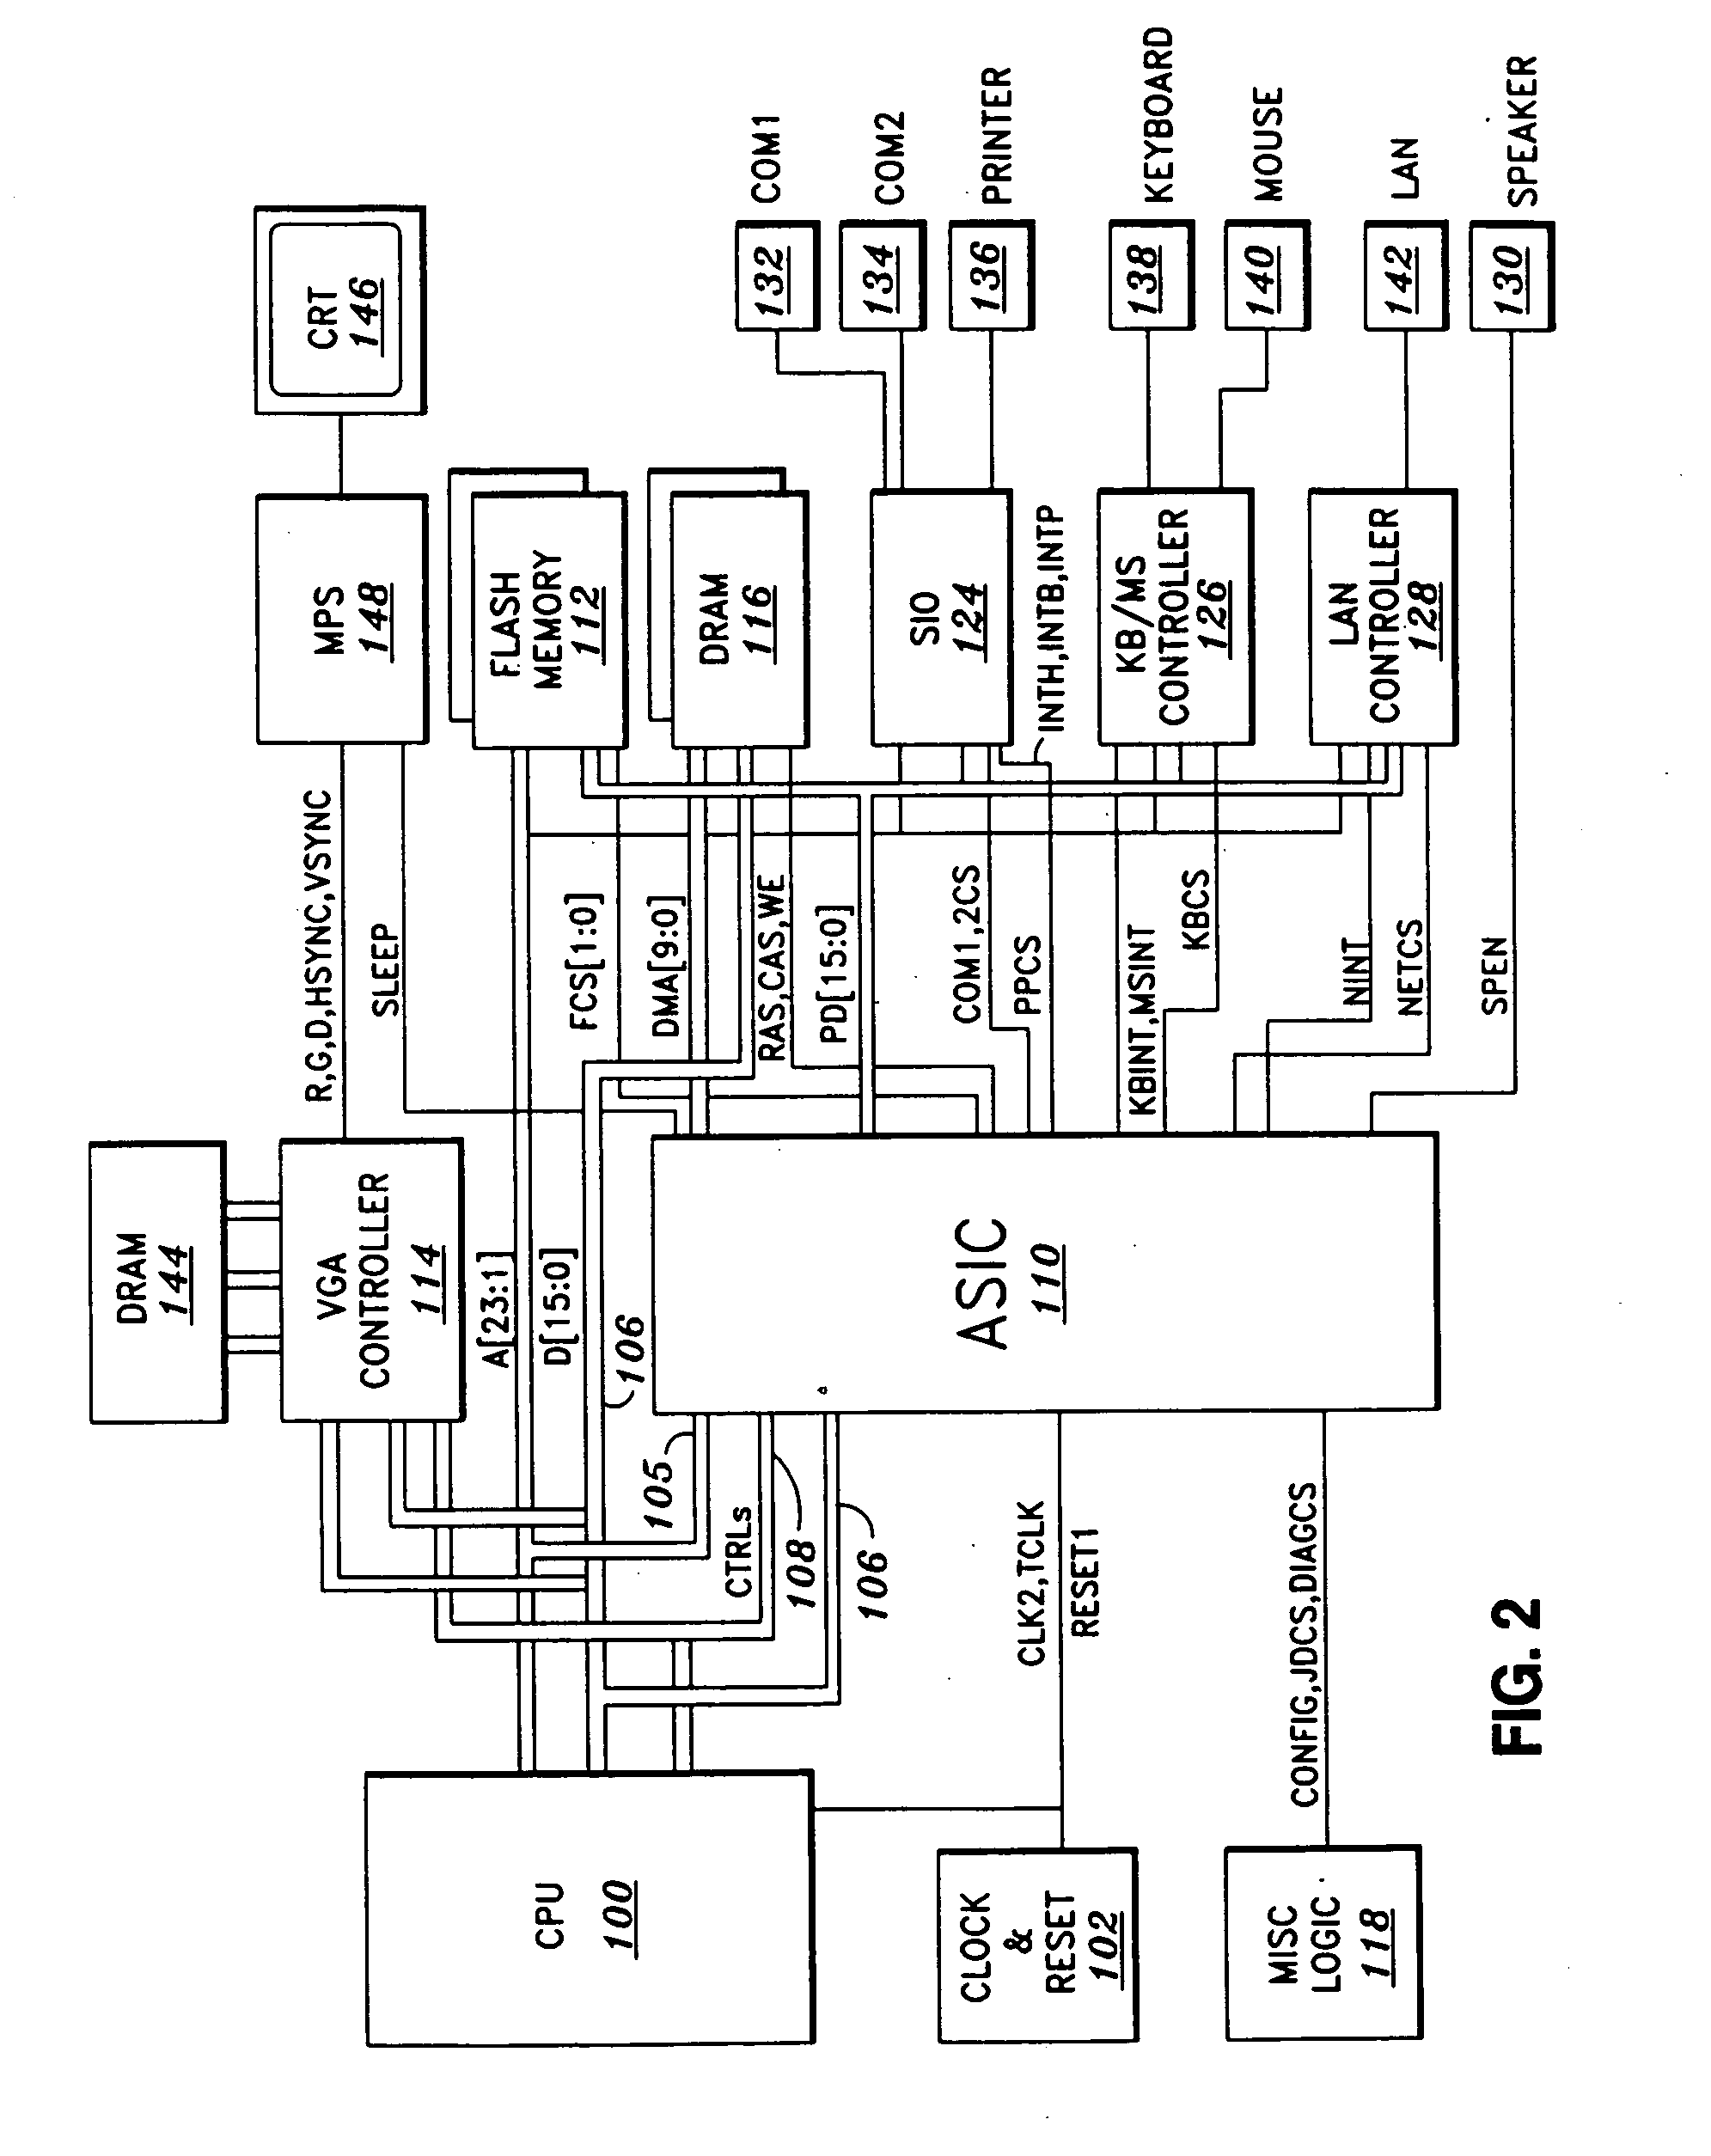 Method and apparatus for display of windowing application programs on a terminal